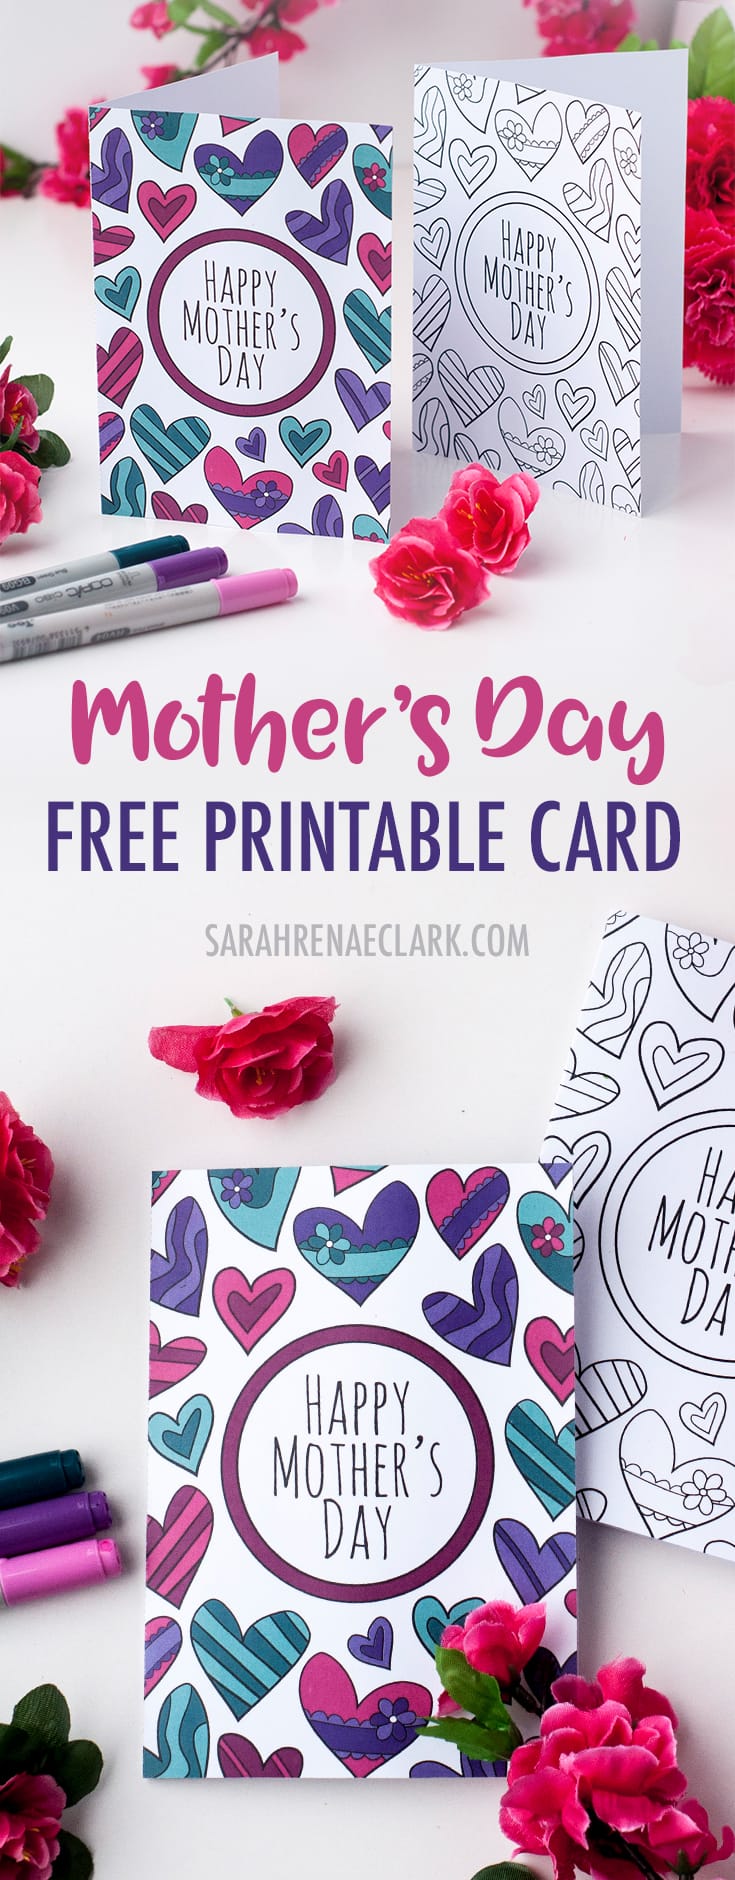 Free Mother's Day Card | Printable Template - Sarah Renae Clark ...